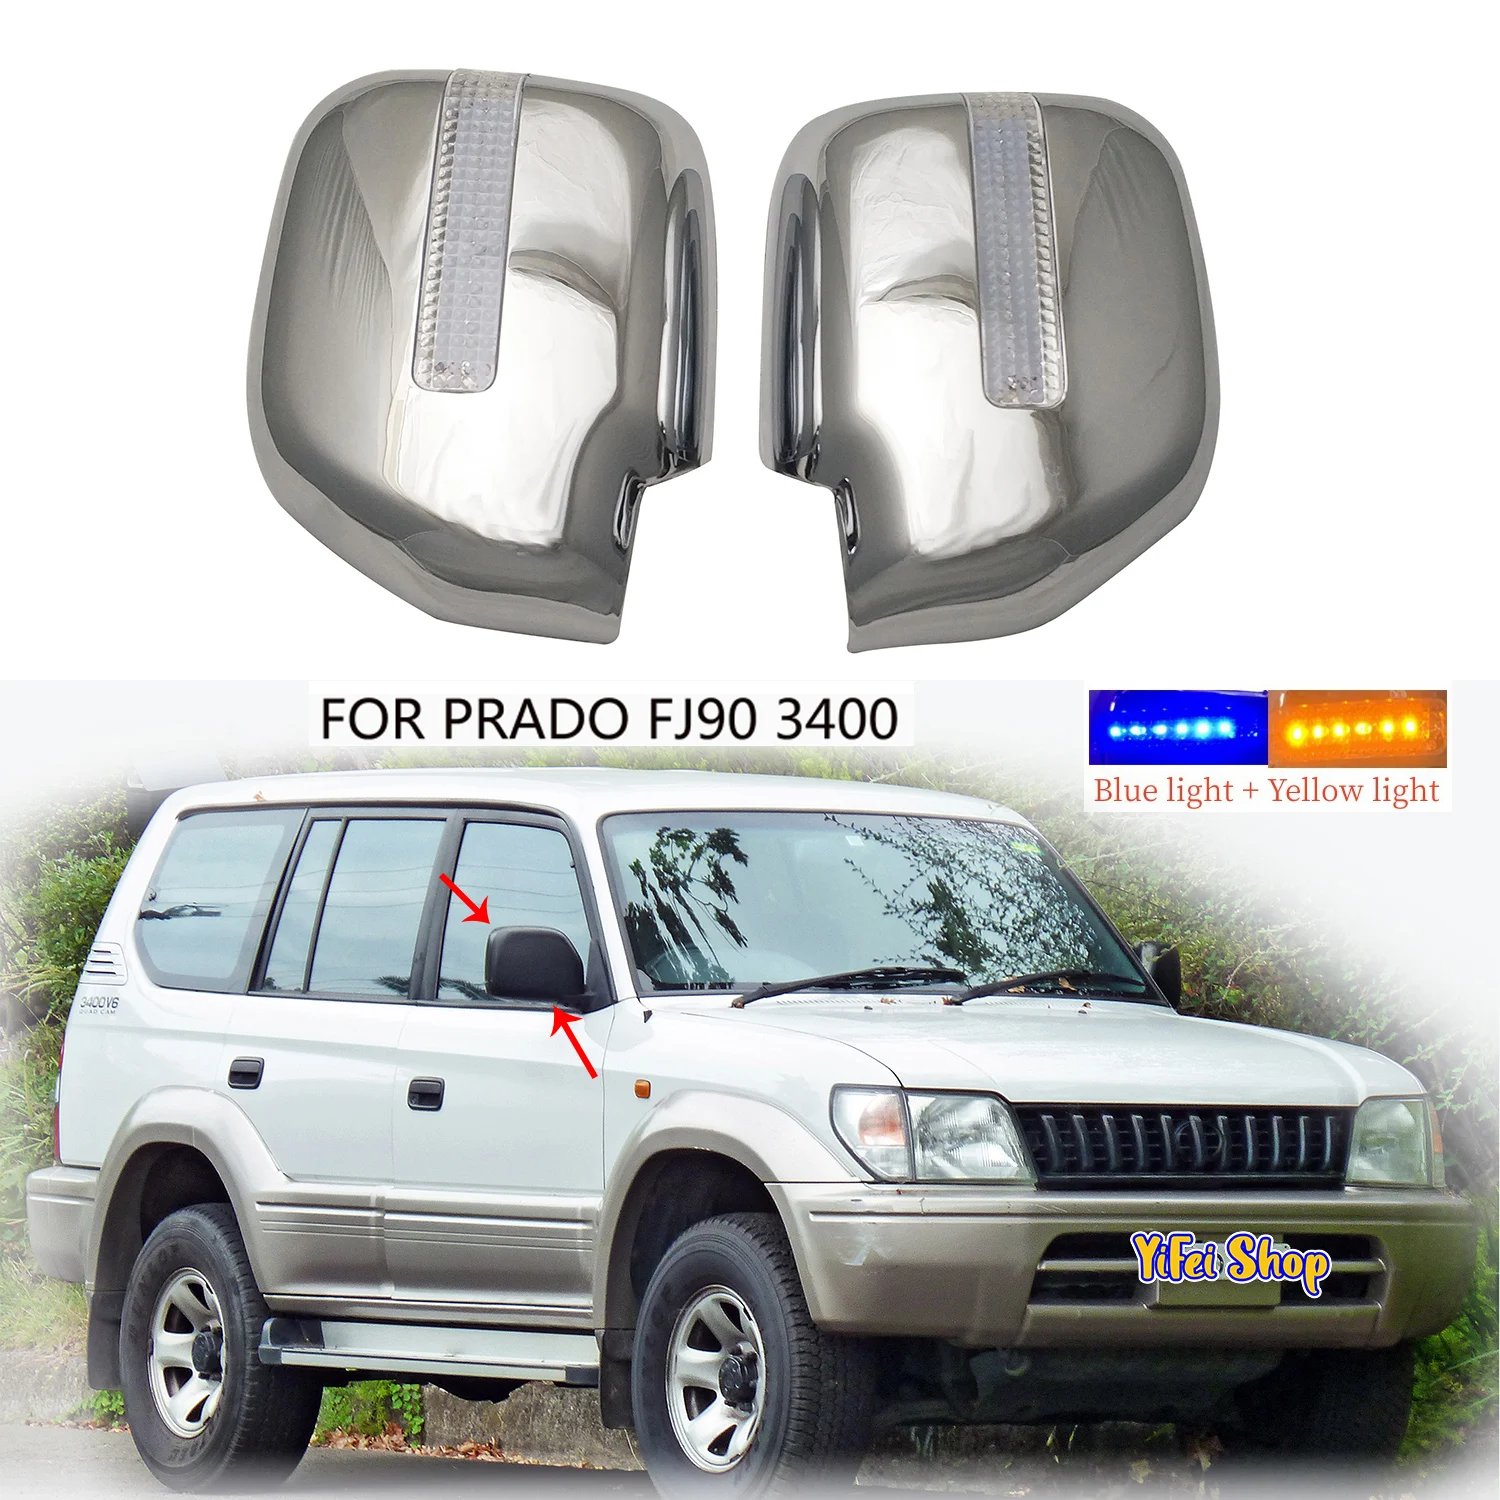 

1996-2002 For Toyota Land Cruiser Prado fj90 J90 90 3400 Car ABS Chrome Accessories Plated Door Rearview Mirror Cover With LED